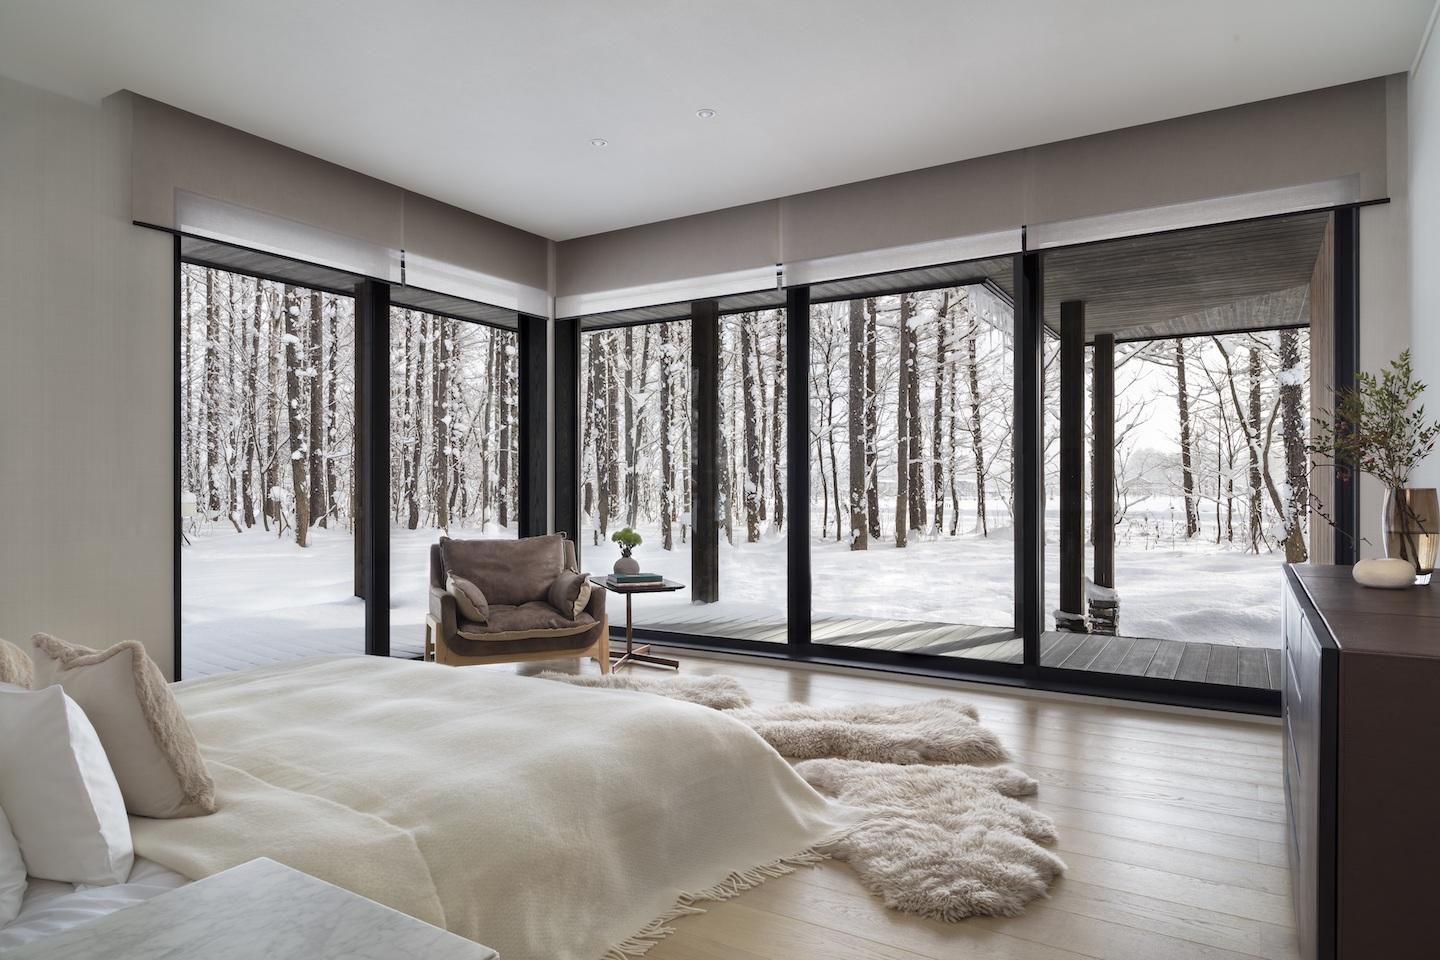 The view from the master suite is an exhibition of nature at its finest